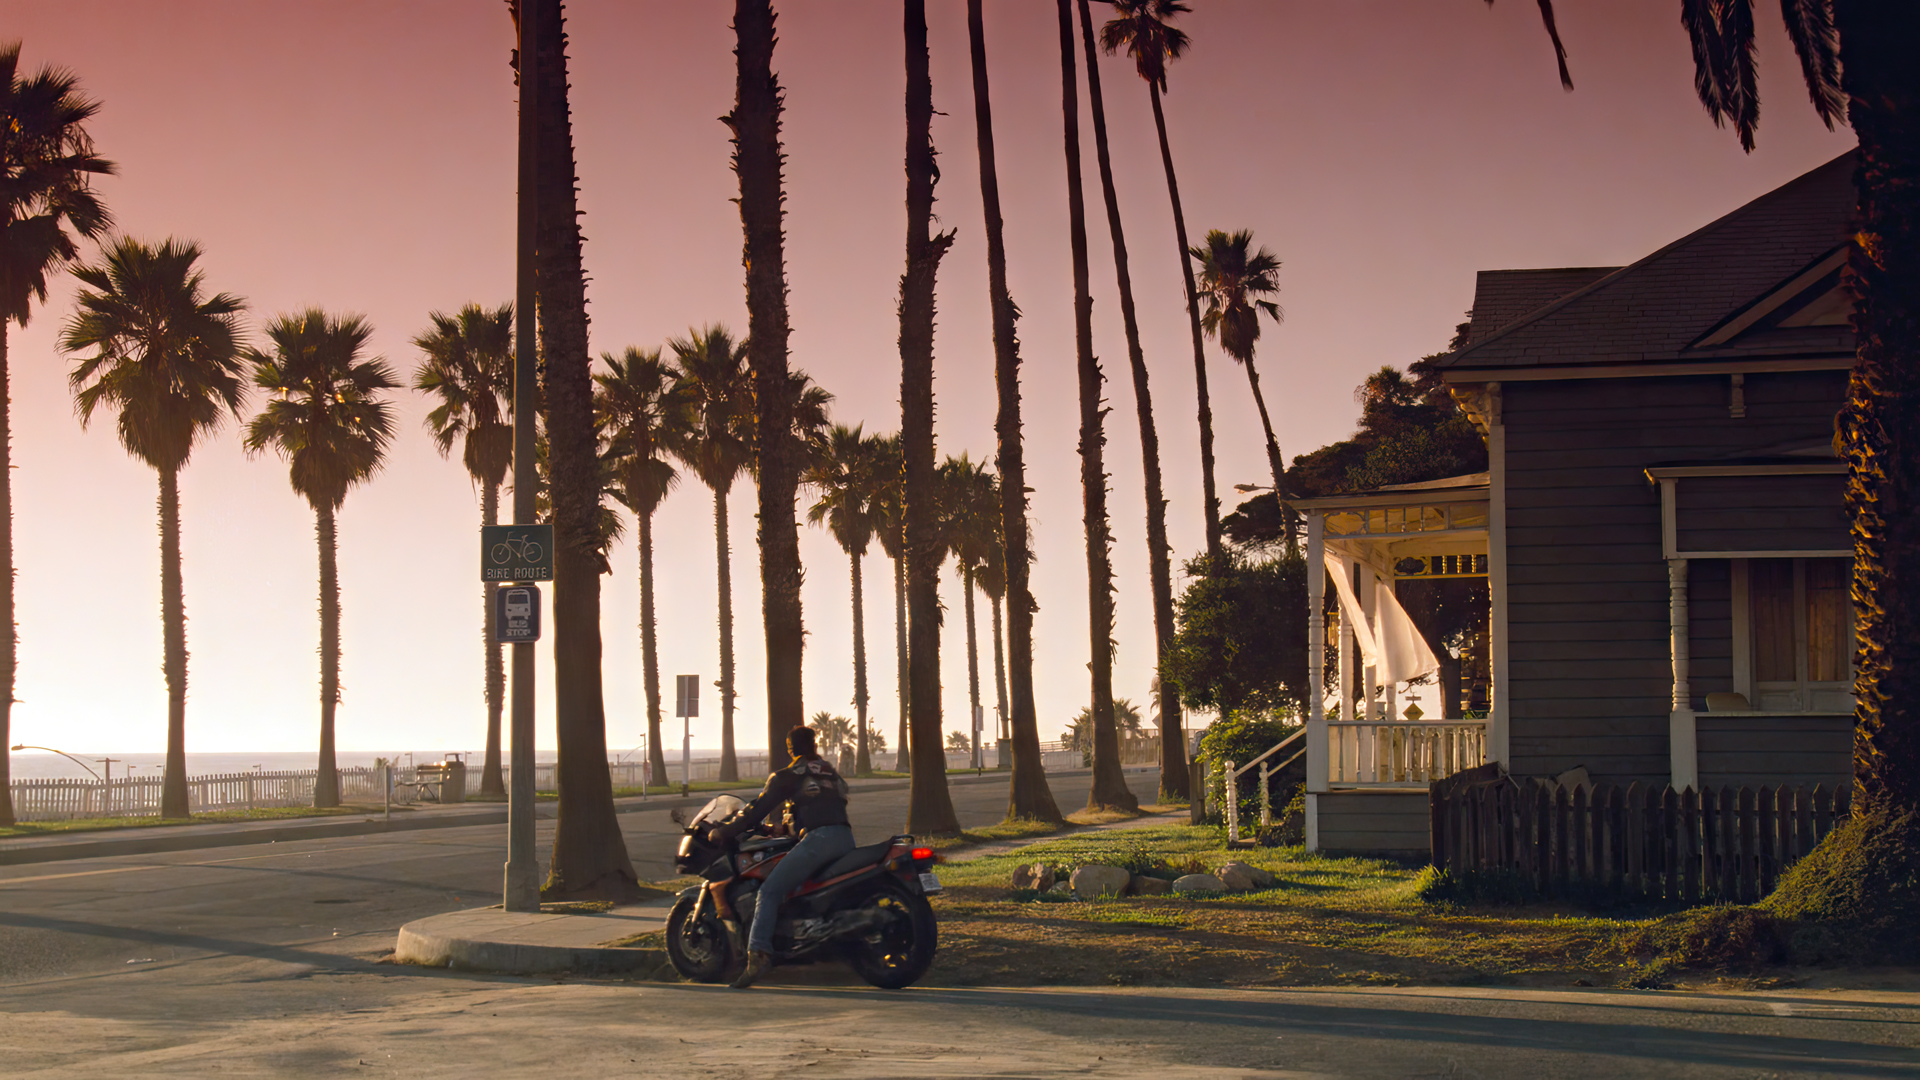 General 1920x1080 Top Gun  movies film stills Tom Cruise actor motorcycle palm trees street house road sign sky sunset sunset glow vehicle road